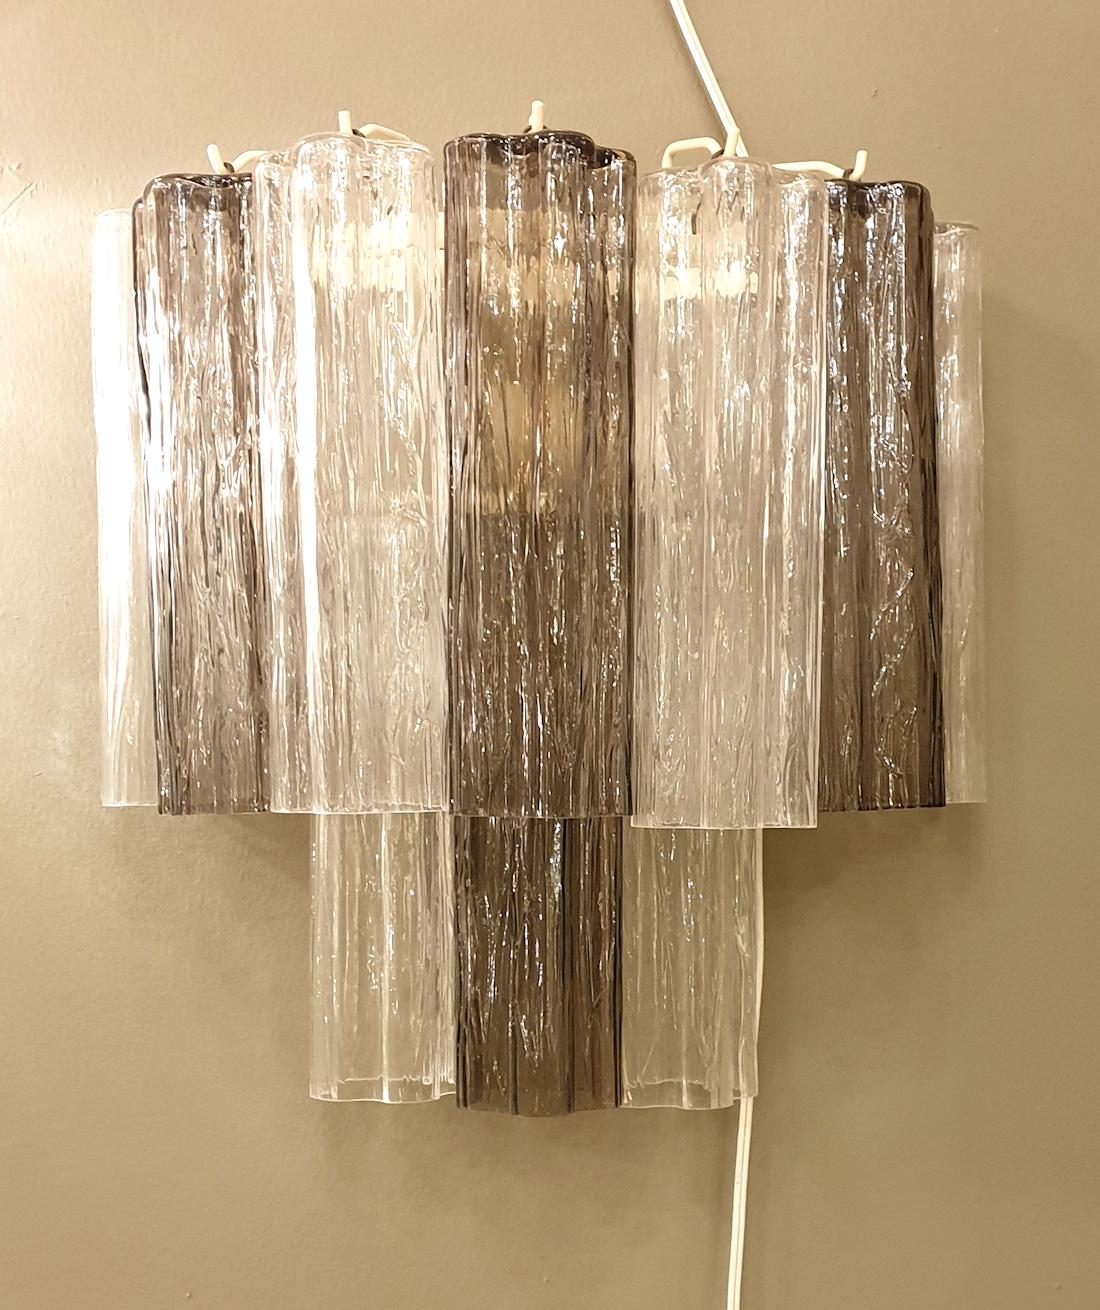 Pair of Mid-Century Modern two colors Venini Tronchi Murano glass sconces, Italy, 1970s.
The pairs of sconces alternates transparent and beige colors of glass.
The frame is painted in ivory
The sconces have 2 lights each: rewired with candelabra